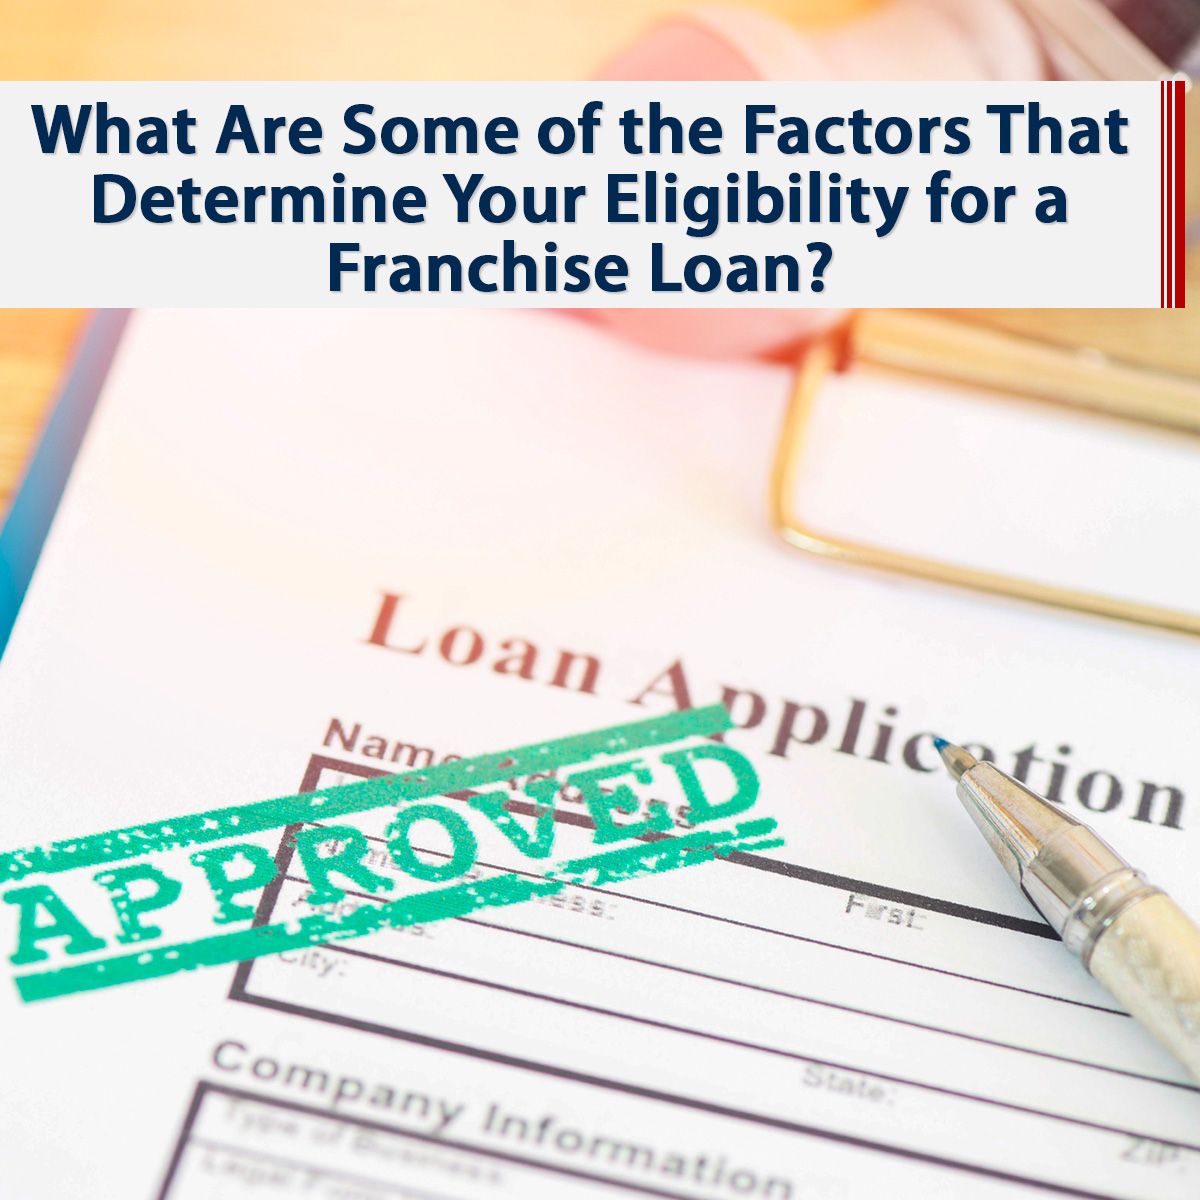 What Are Some of the Factors That Determine Your Eligibility for a Franchise Loan?